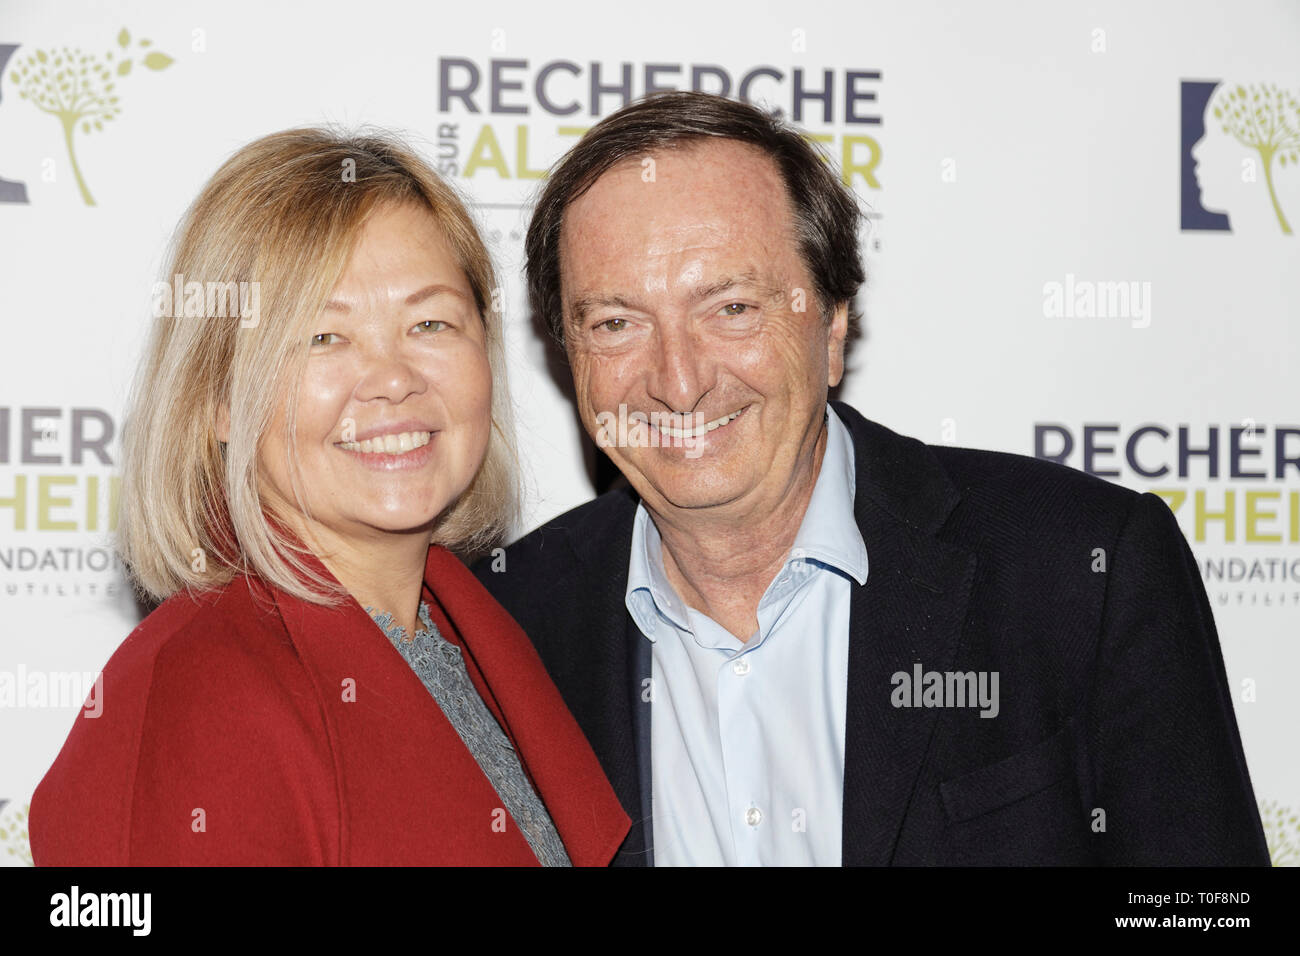 Paris, France. 18th Mar 2019. Michel Edouard Leclerc and Natalia Olzoeva- Photocall of the 14th Gala 2019 of the Association for Alzheimer Research at the Olympia in Paris on March 18, 2019, France Credit: Véronique PHITOUSSI/Alamy Live News Stock Photo